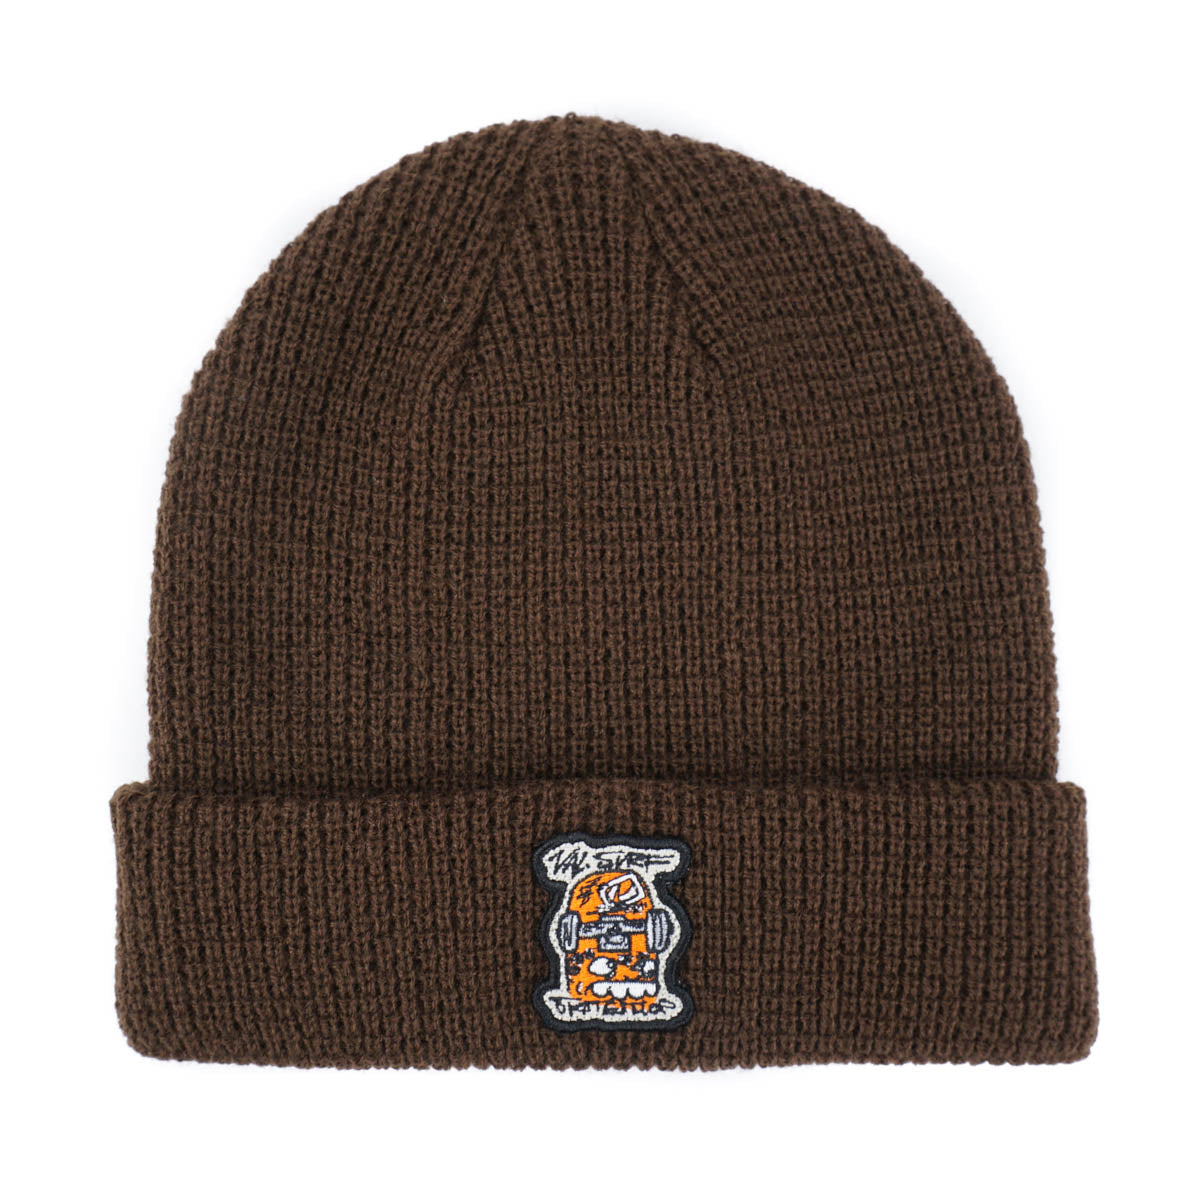 product image Skate Glaboe Beanie - Brown - O/S